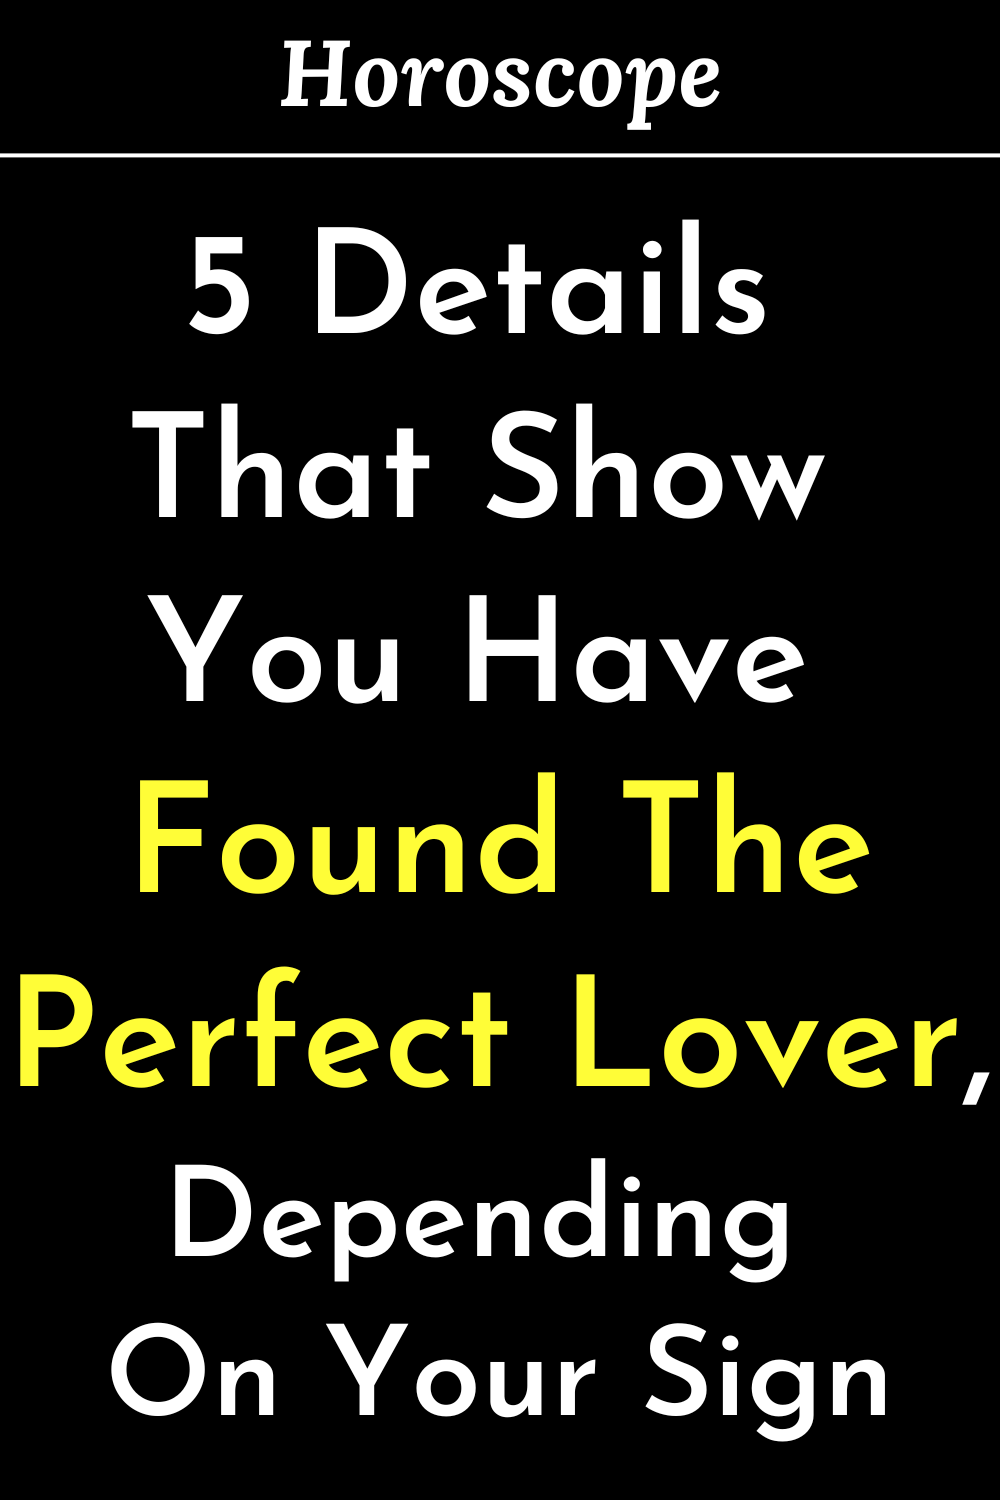 5 Details That Show You Have Found The Perfect Lover, Depending On Your Sign